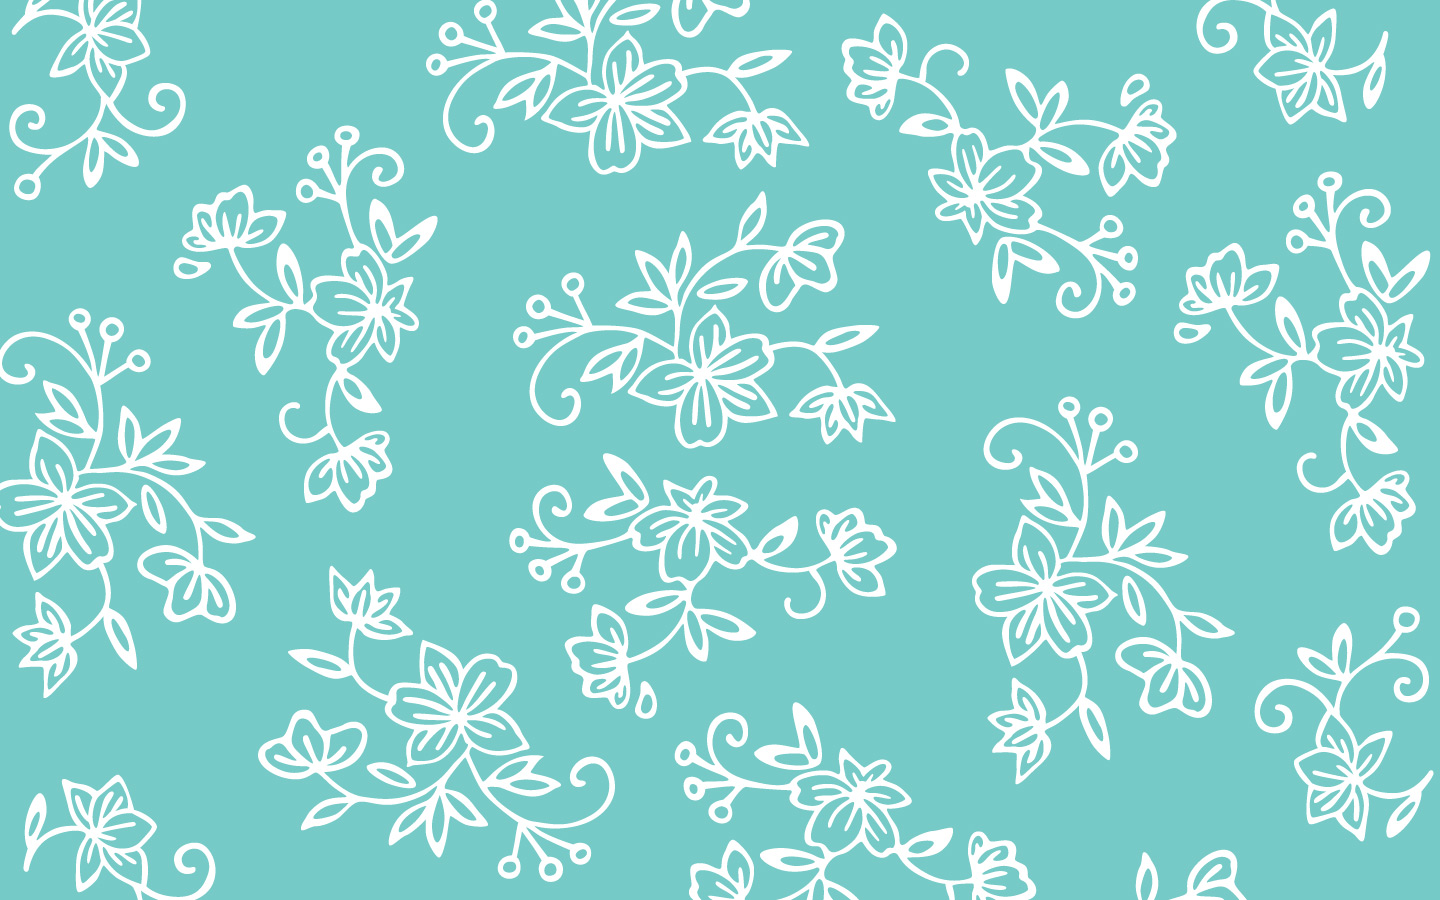 Prepare To Go Bold With New Floral Lace Temp Tations Pattern